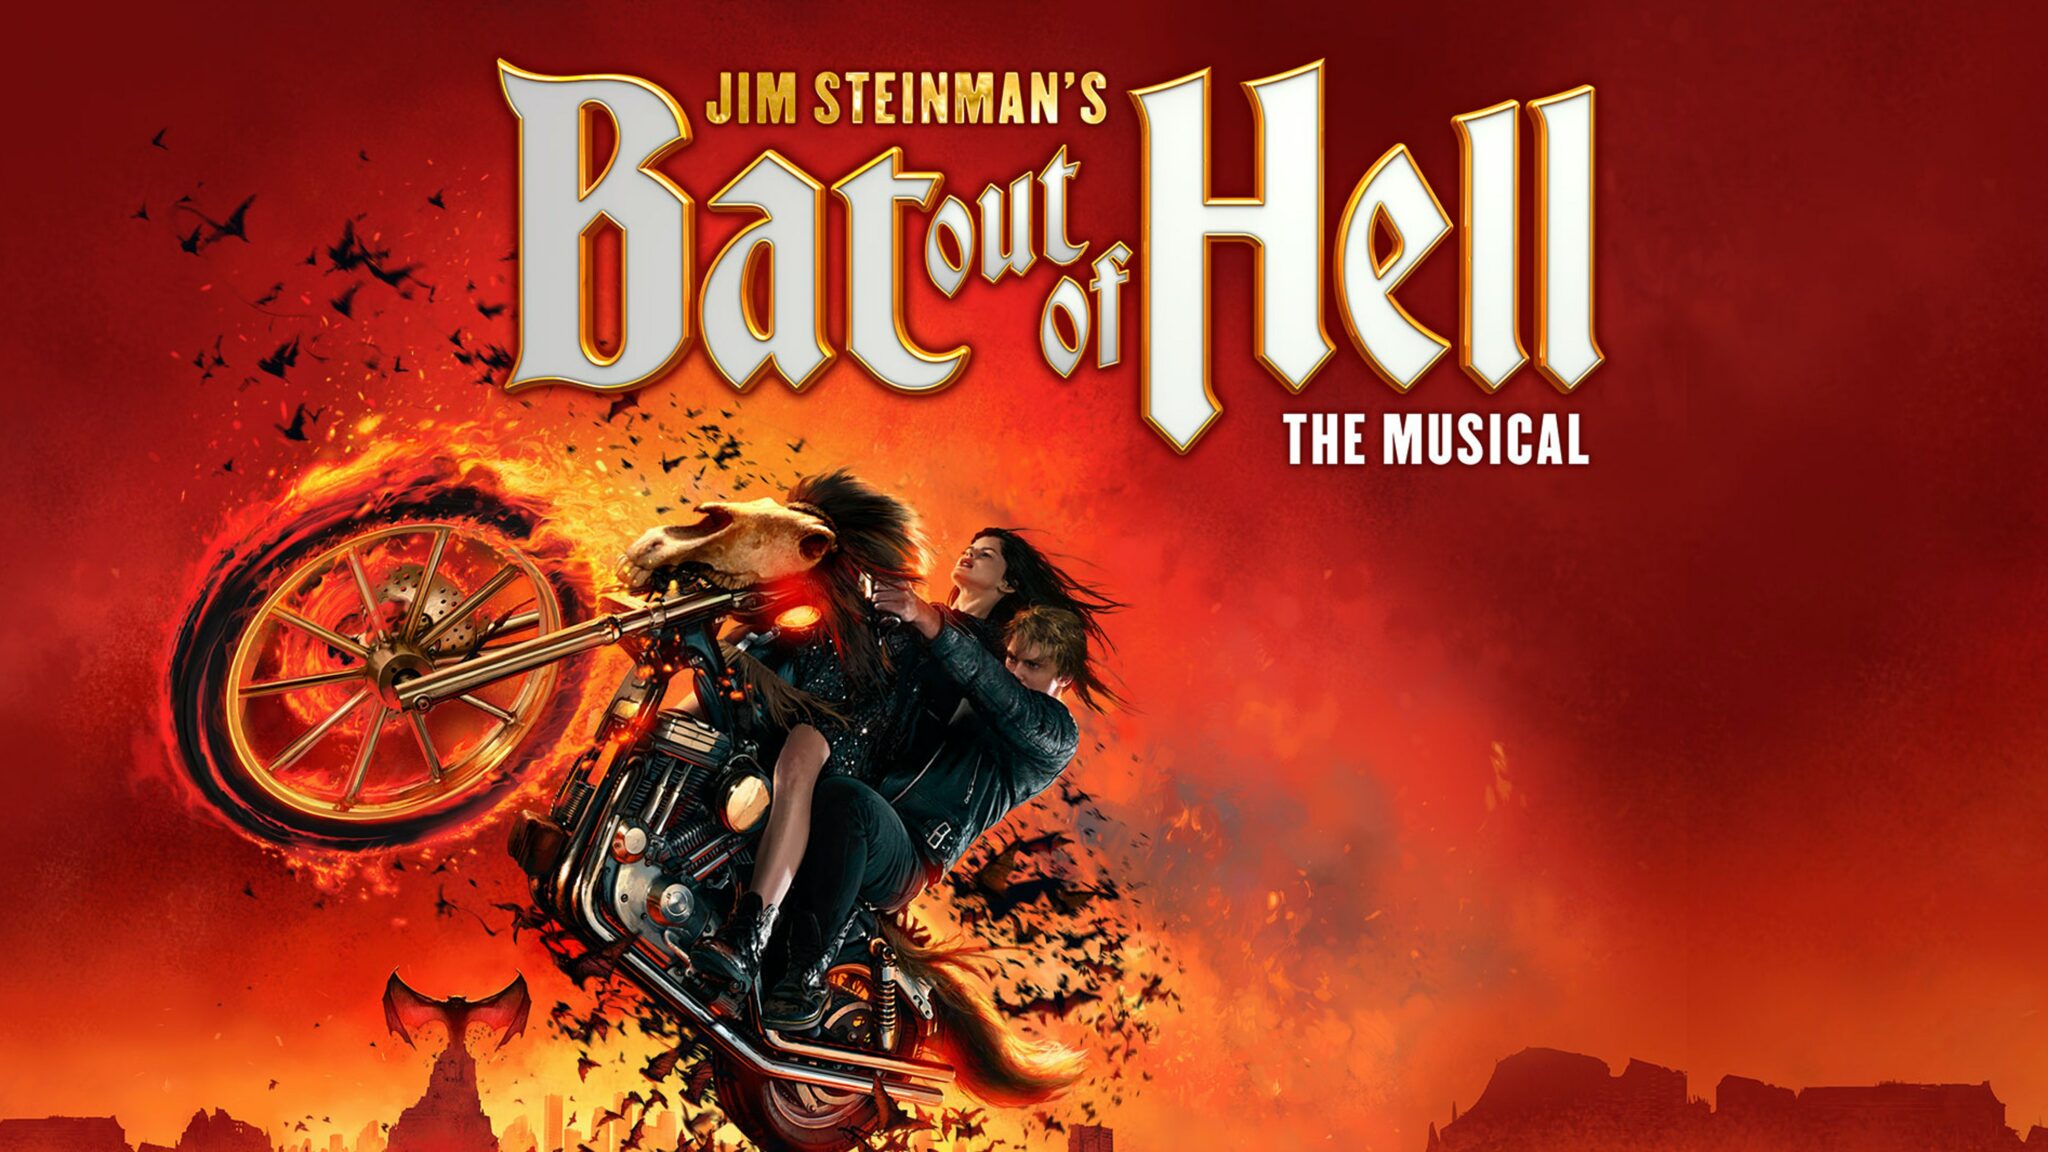 bat out of hell discount tickets